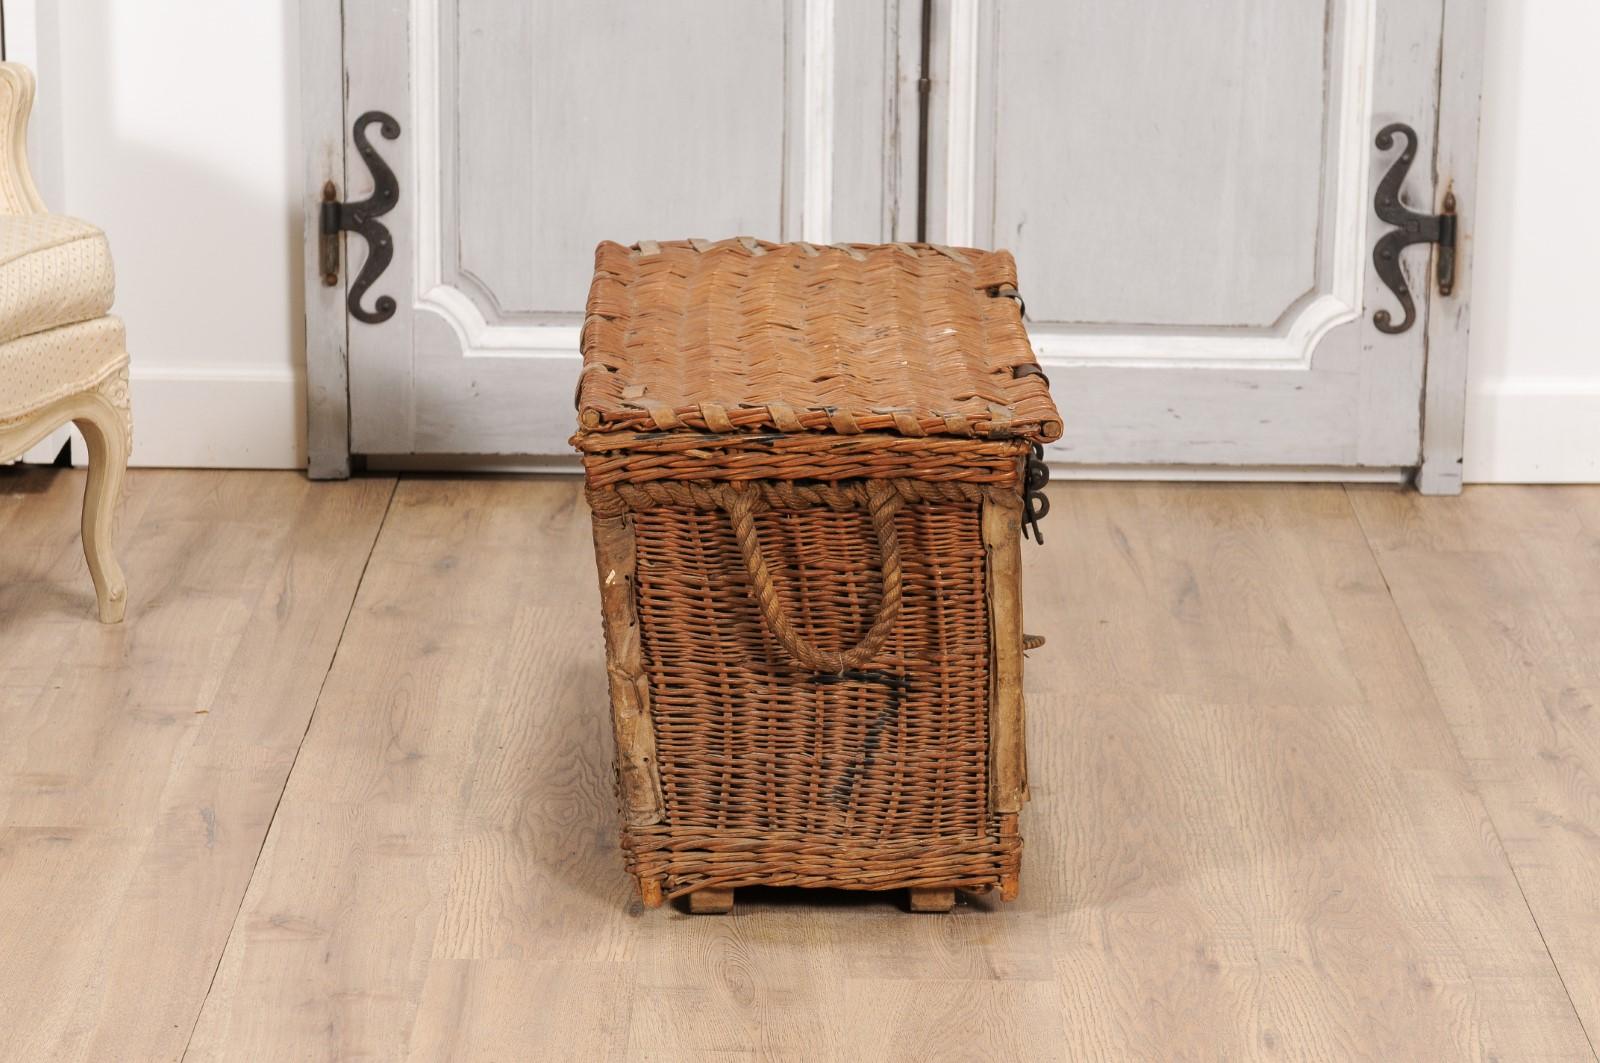 English Rustic 1930s Wicker Trunk with Iron Hardware and Lateral Handles For Sale 2